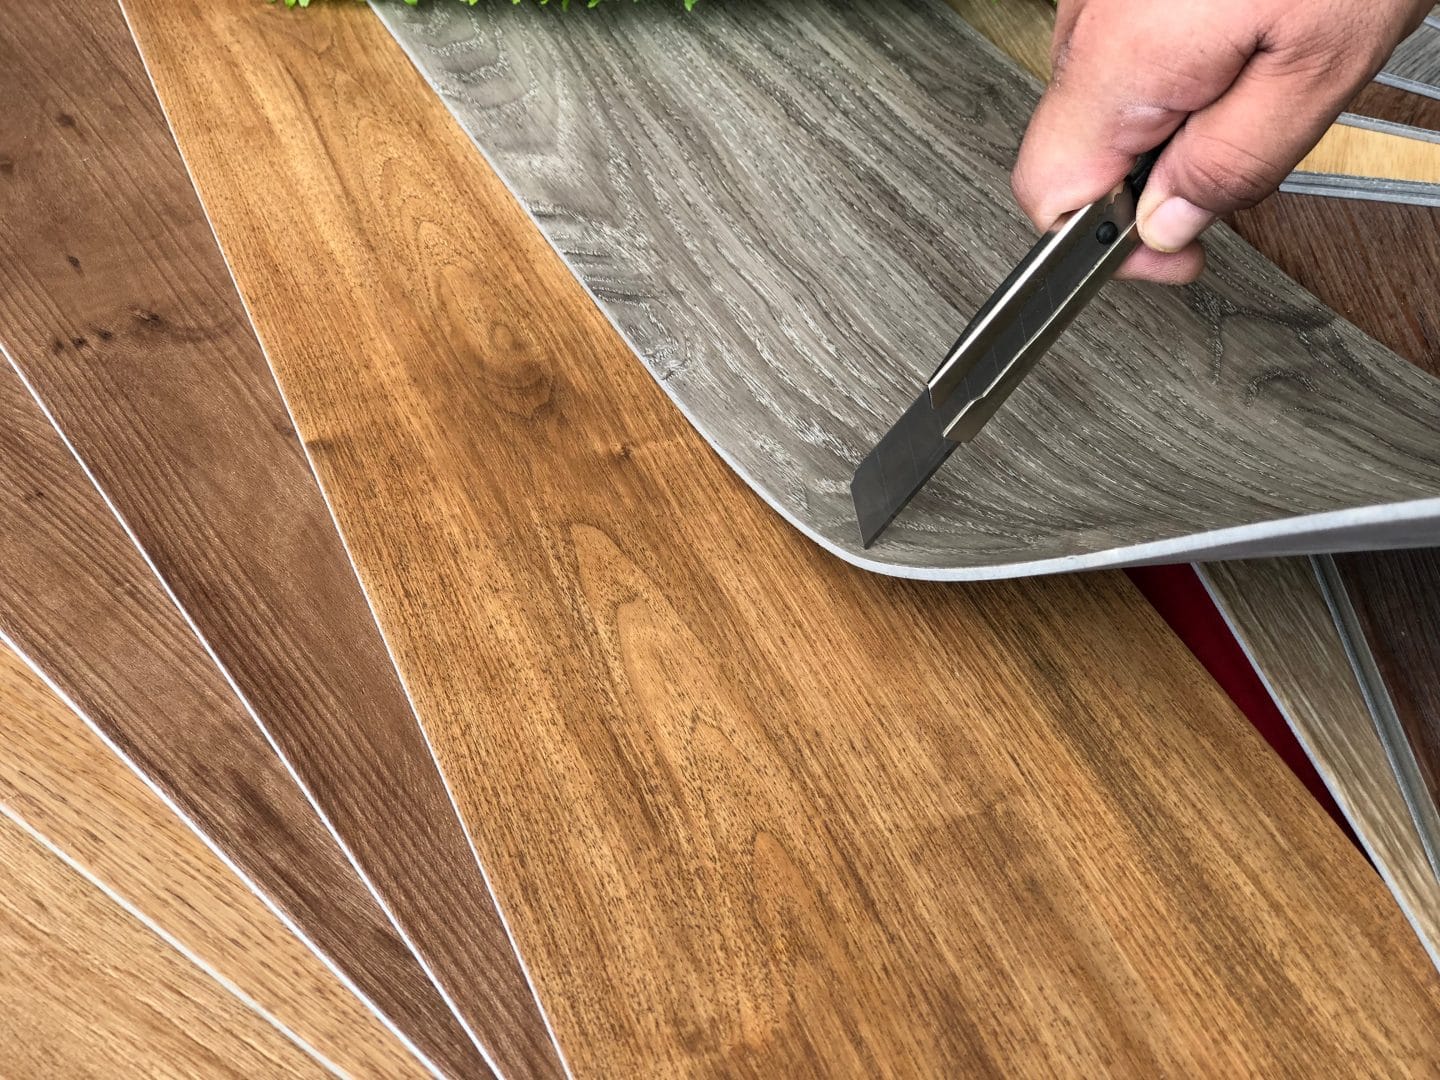 Vinyl Floor Paint A How To Guide, Can You Lay Laminate Flooring Over Marley Tiles